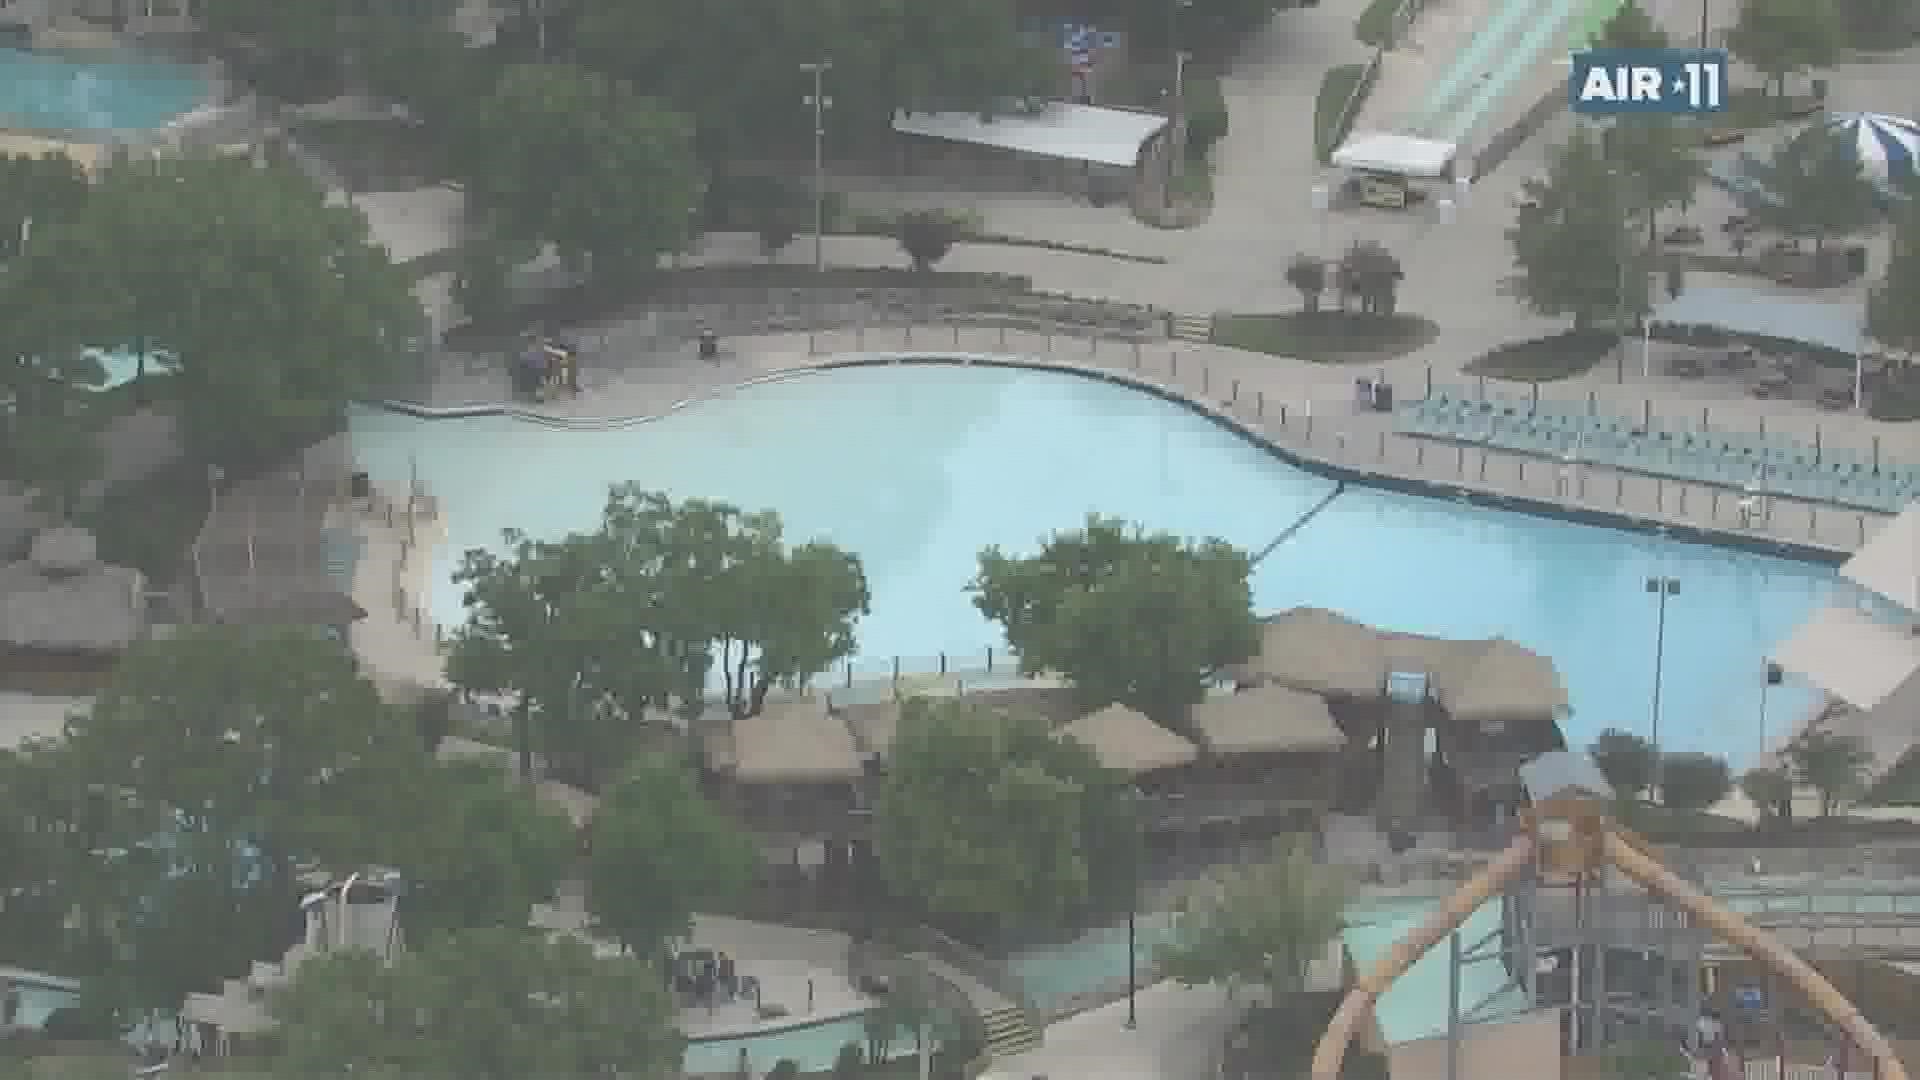 People like David Hodge are frustrated because as of Friday afternoon the website for the waterpark was still advertising and selling daily passes.